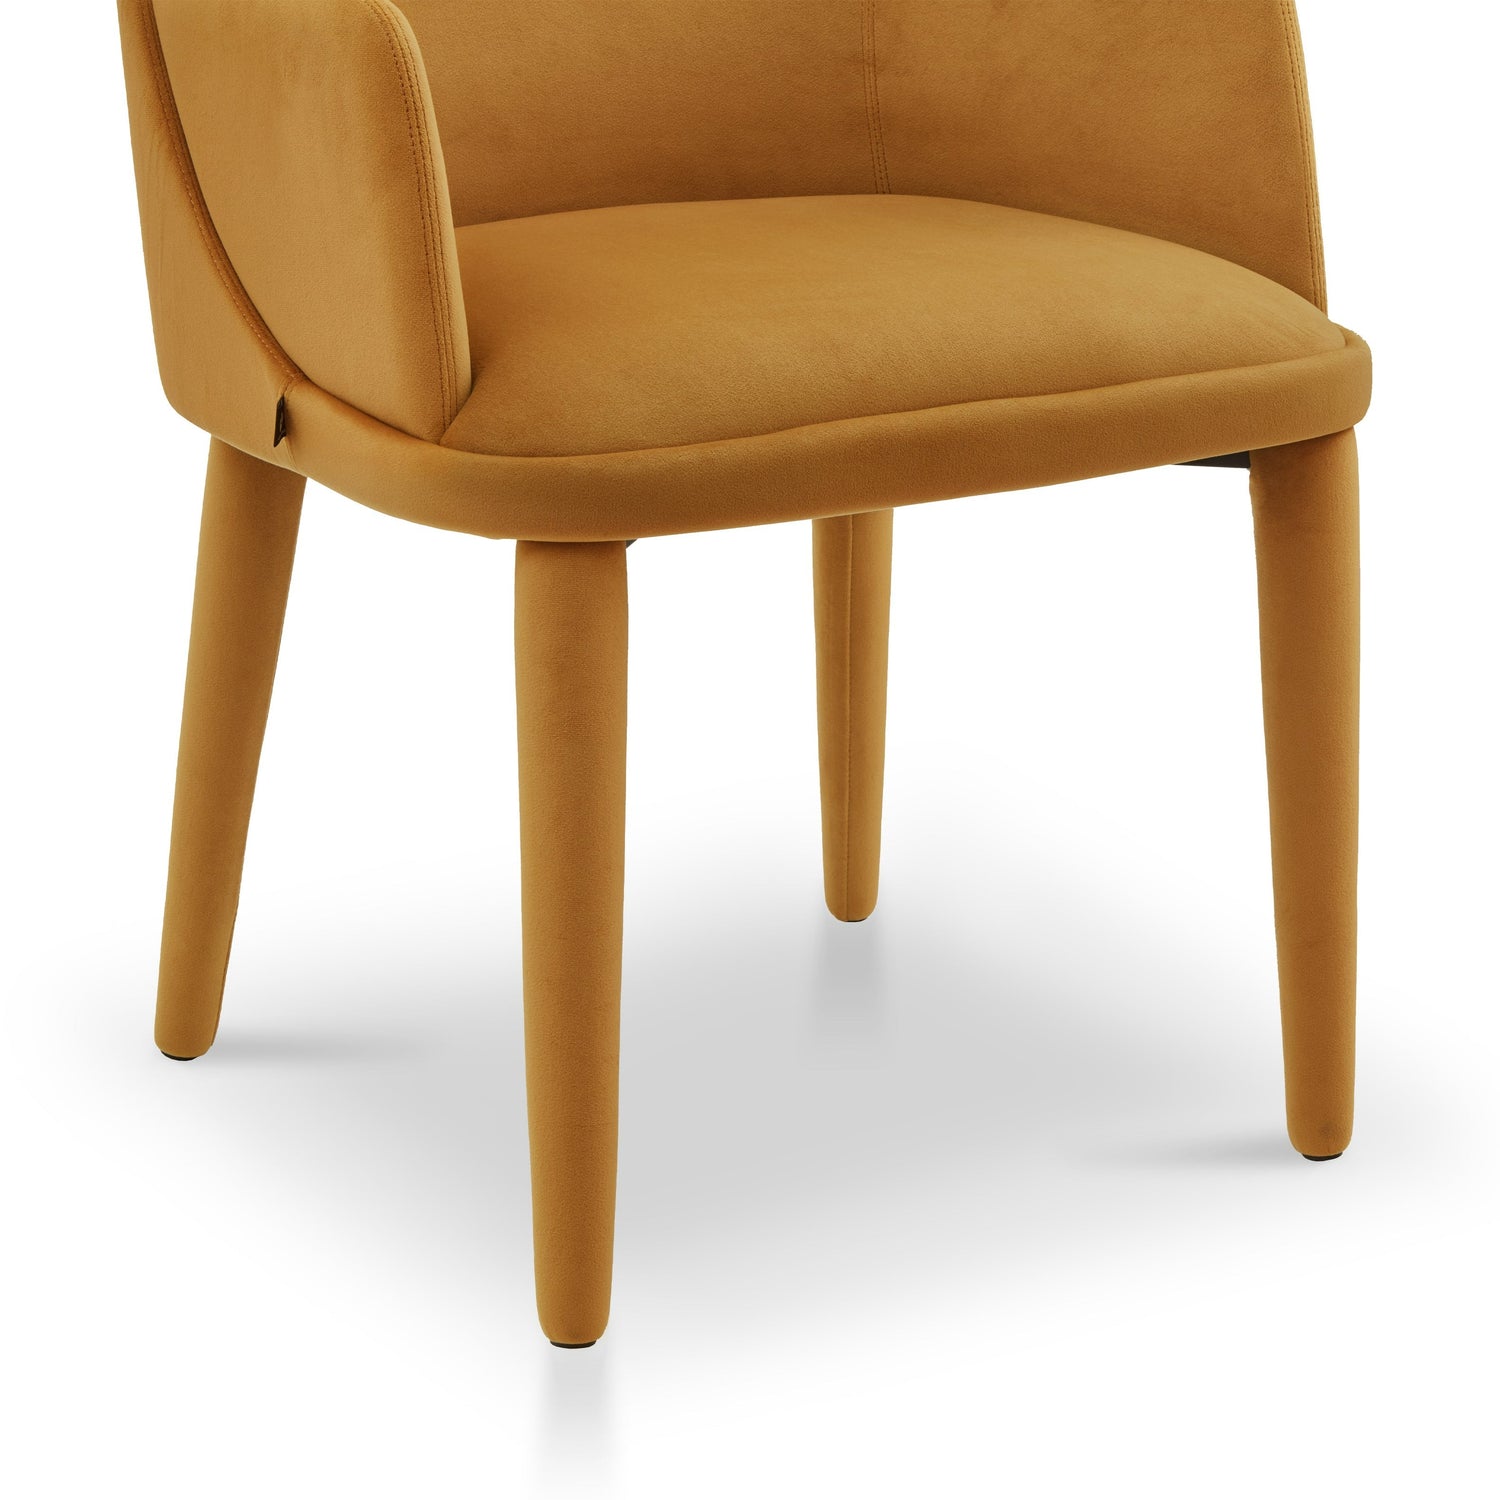  LiangAndEimil-Liang & Eimil Diva Dining Chair with Arms in  Kaster II Mustard-Yellow 349 